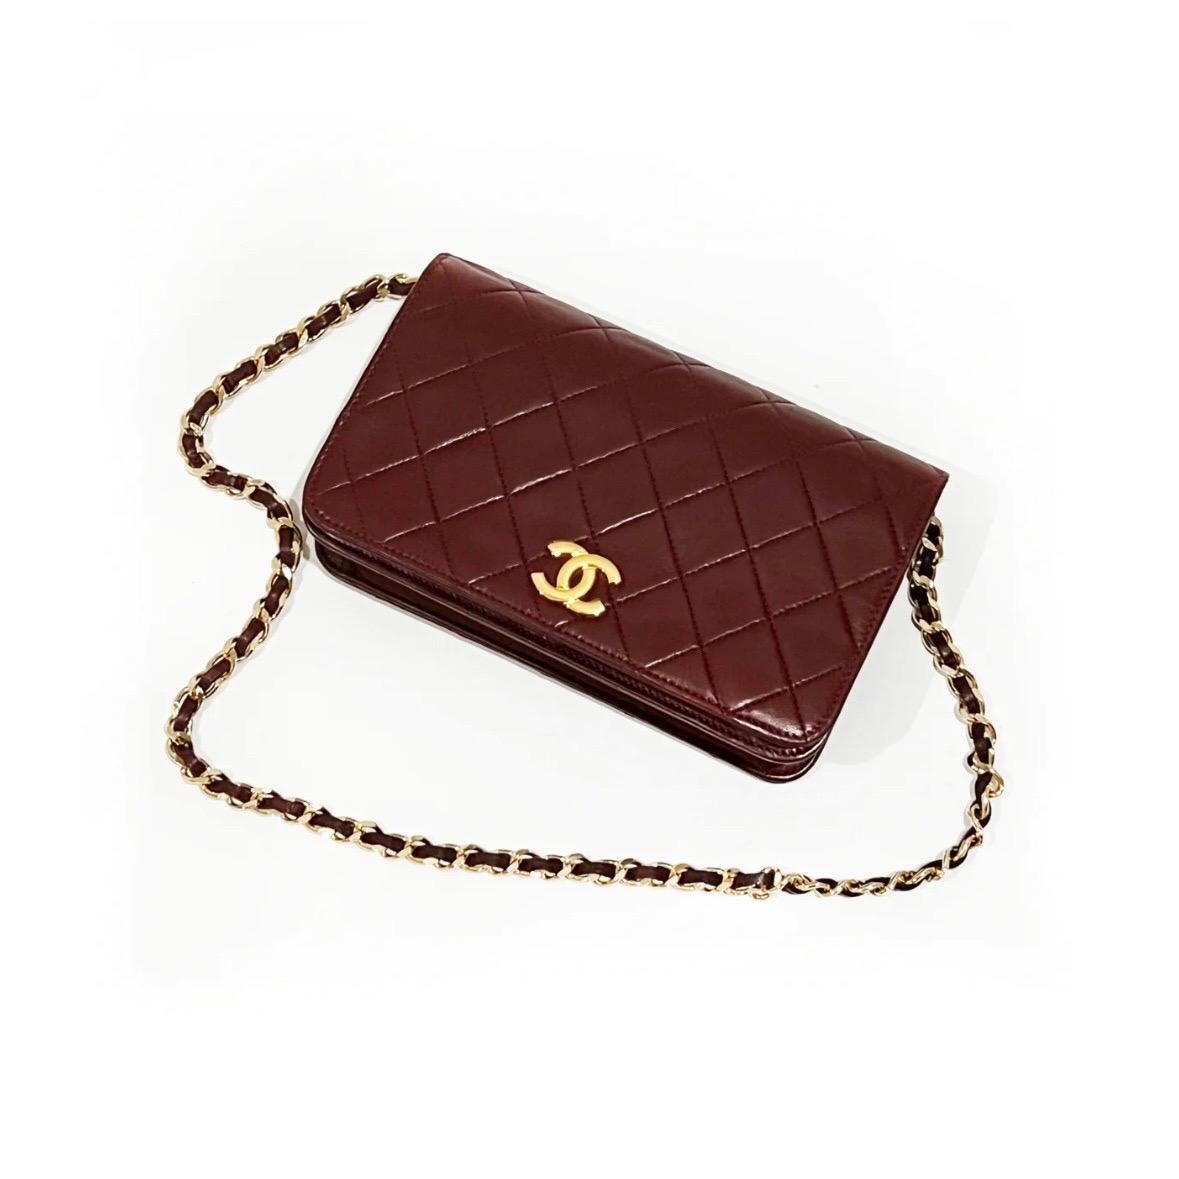 Vintage Quilted Burgundy Shoulder Bag by Chanel 
Late 1970's to Early 1980's
Burgundy 
Quilted calf-skin leather 
Gold-metal handware 
Front flap with logo CC 
Pin clasp closure  
Single main compartment
Single interior card pocket 
Chain/leather